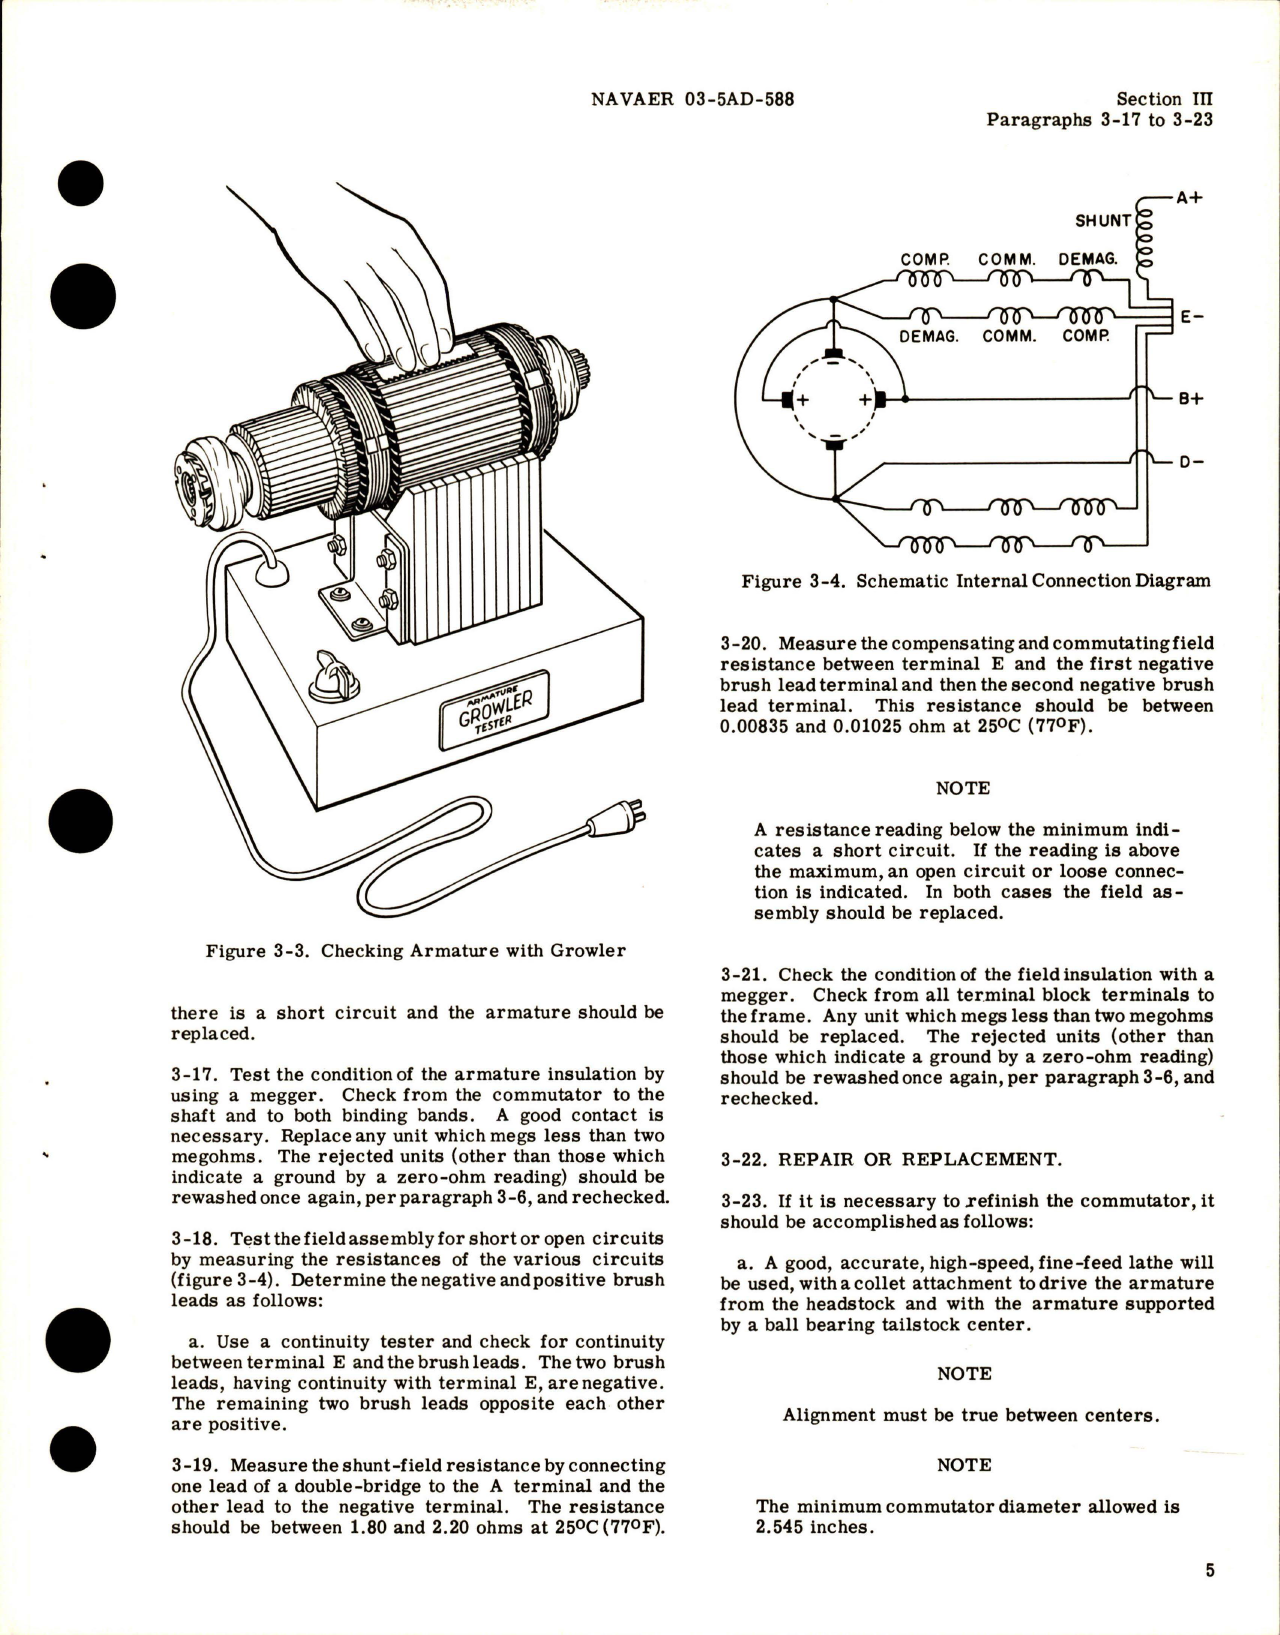 Sample page 9 from AirCorps Library document: Service and Overhaul Instructions for DC Generator 